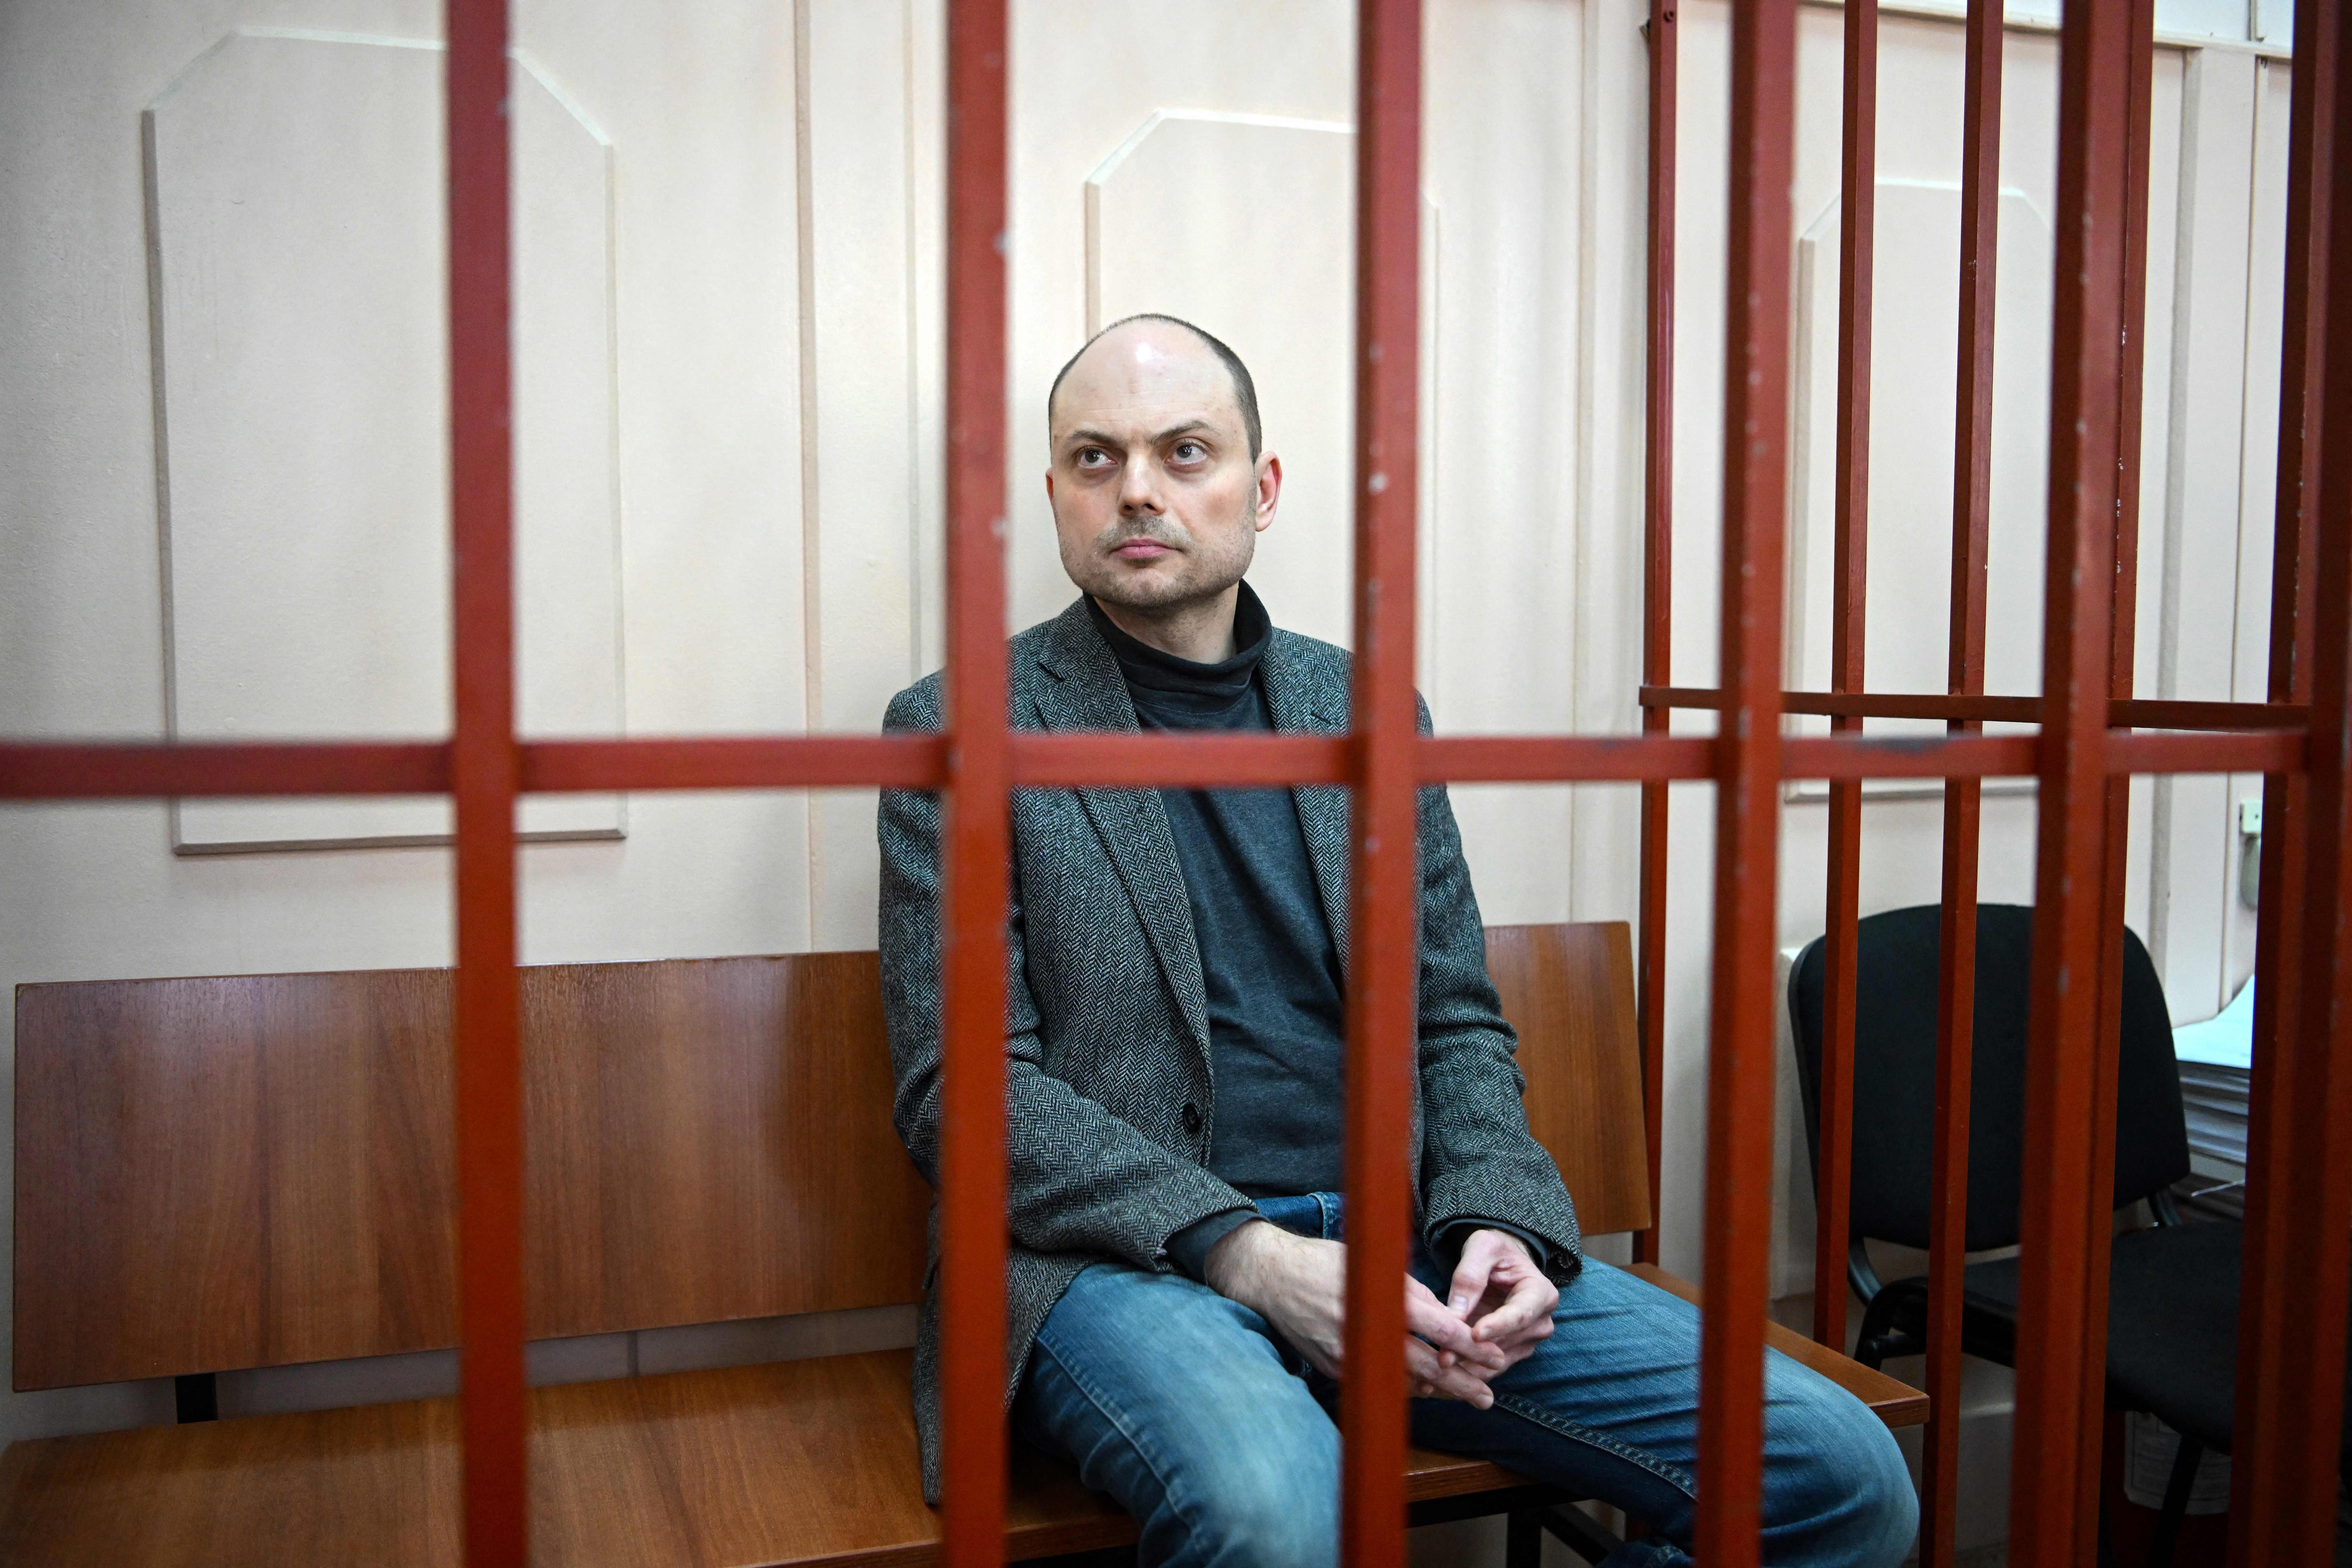 Russian opposition activist Vladimir Kara-Murza sits on a bench inside a defendant’s cage during a hearing at the Basmanny court in Moscow on 10 October 2022